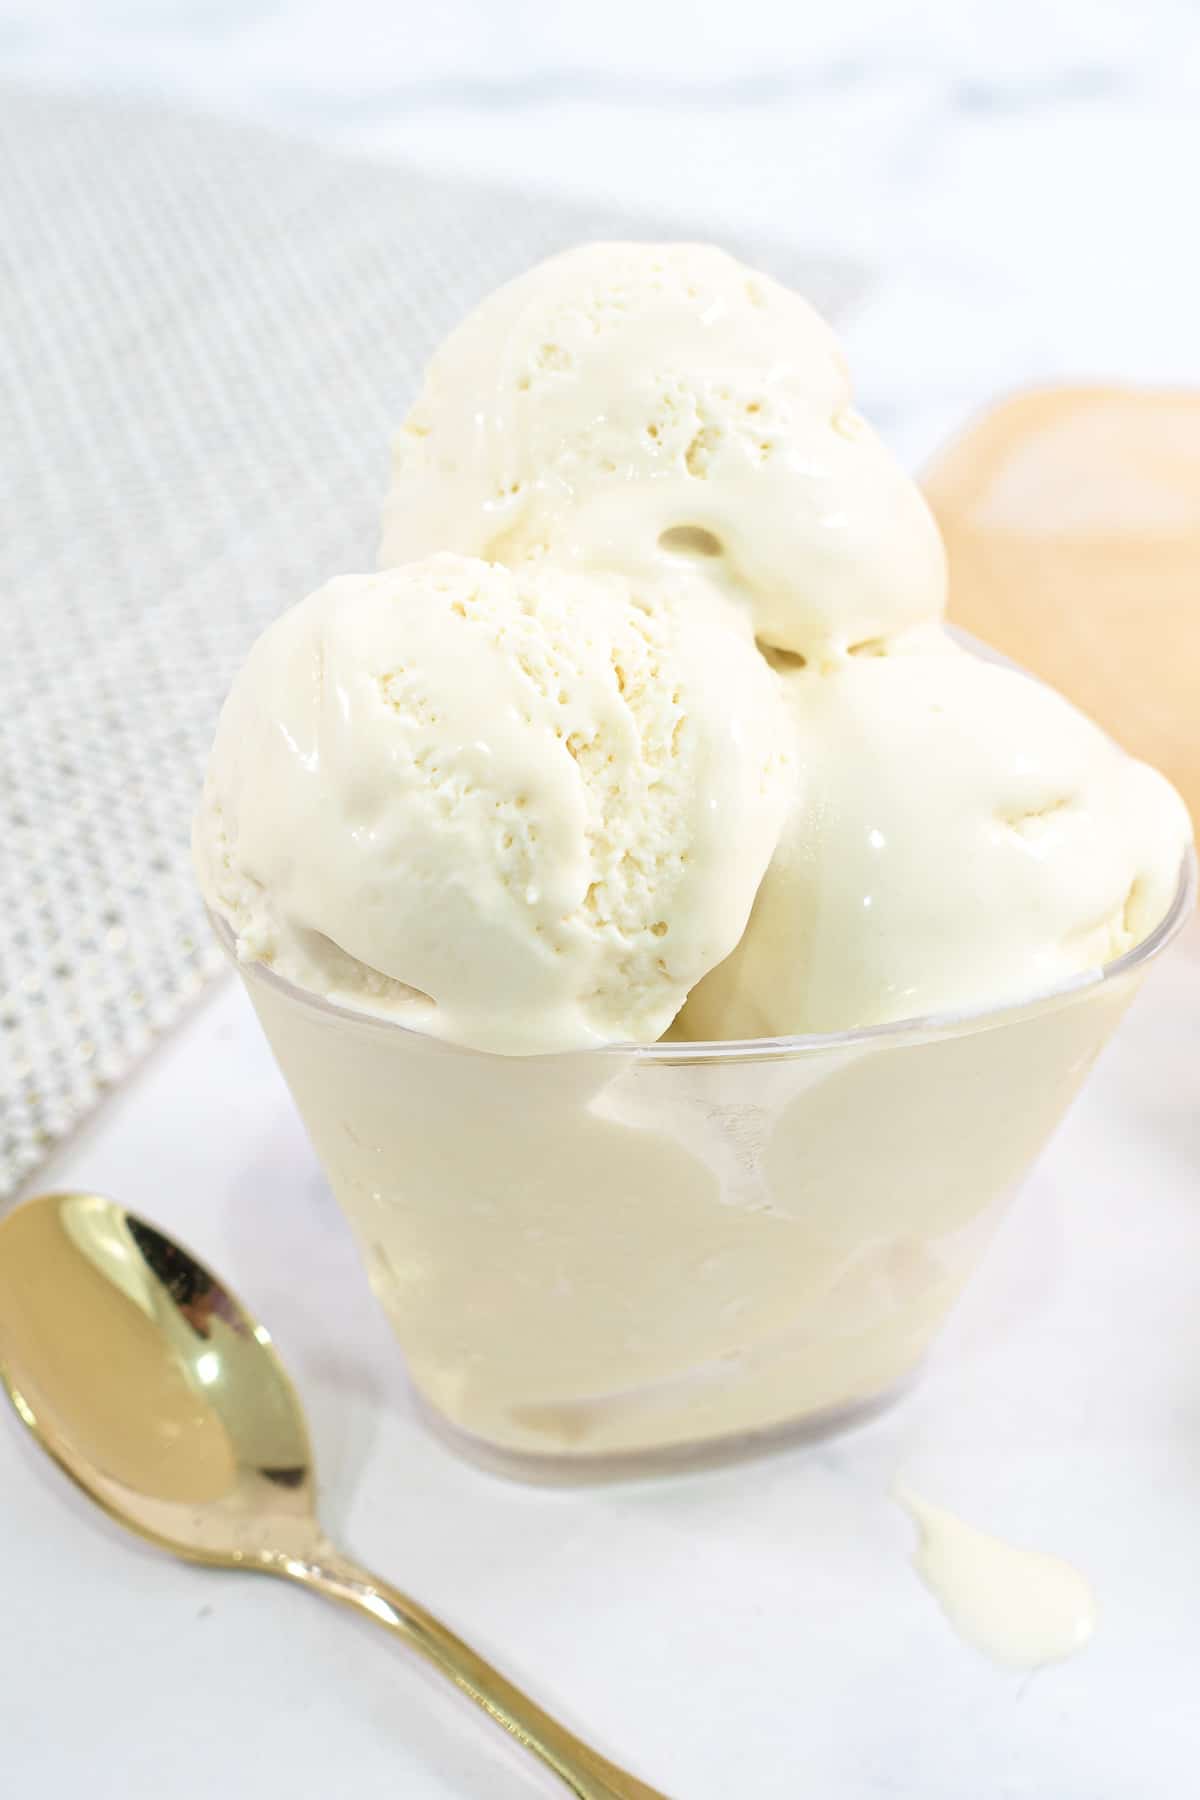 A dessert bowl filled with scoops of vanilla ice cream. A gold spoon is on the side